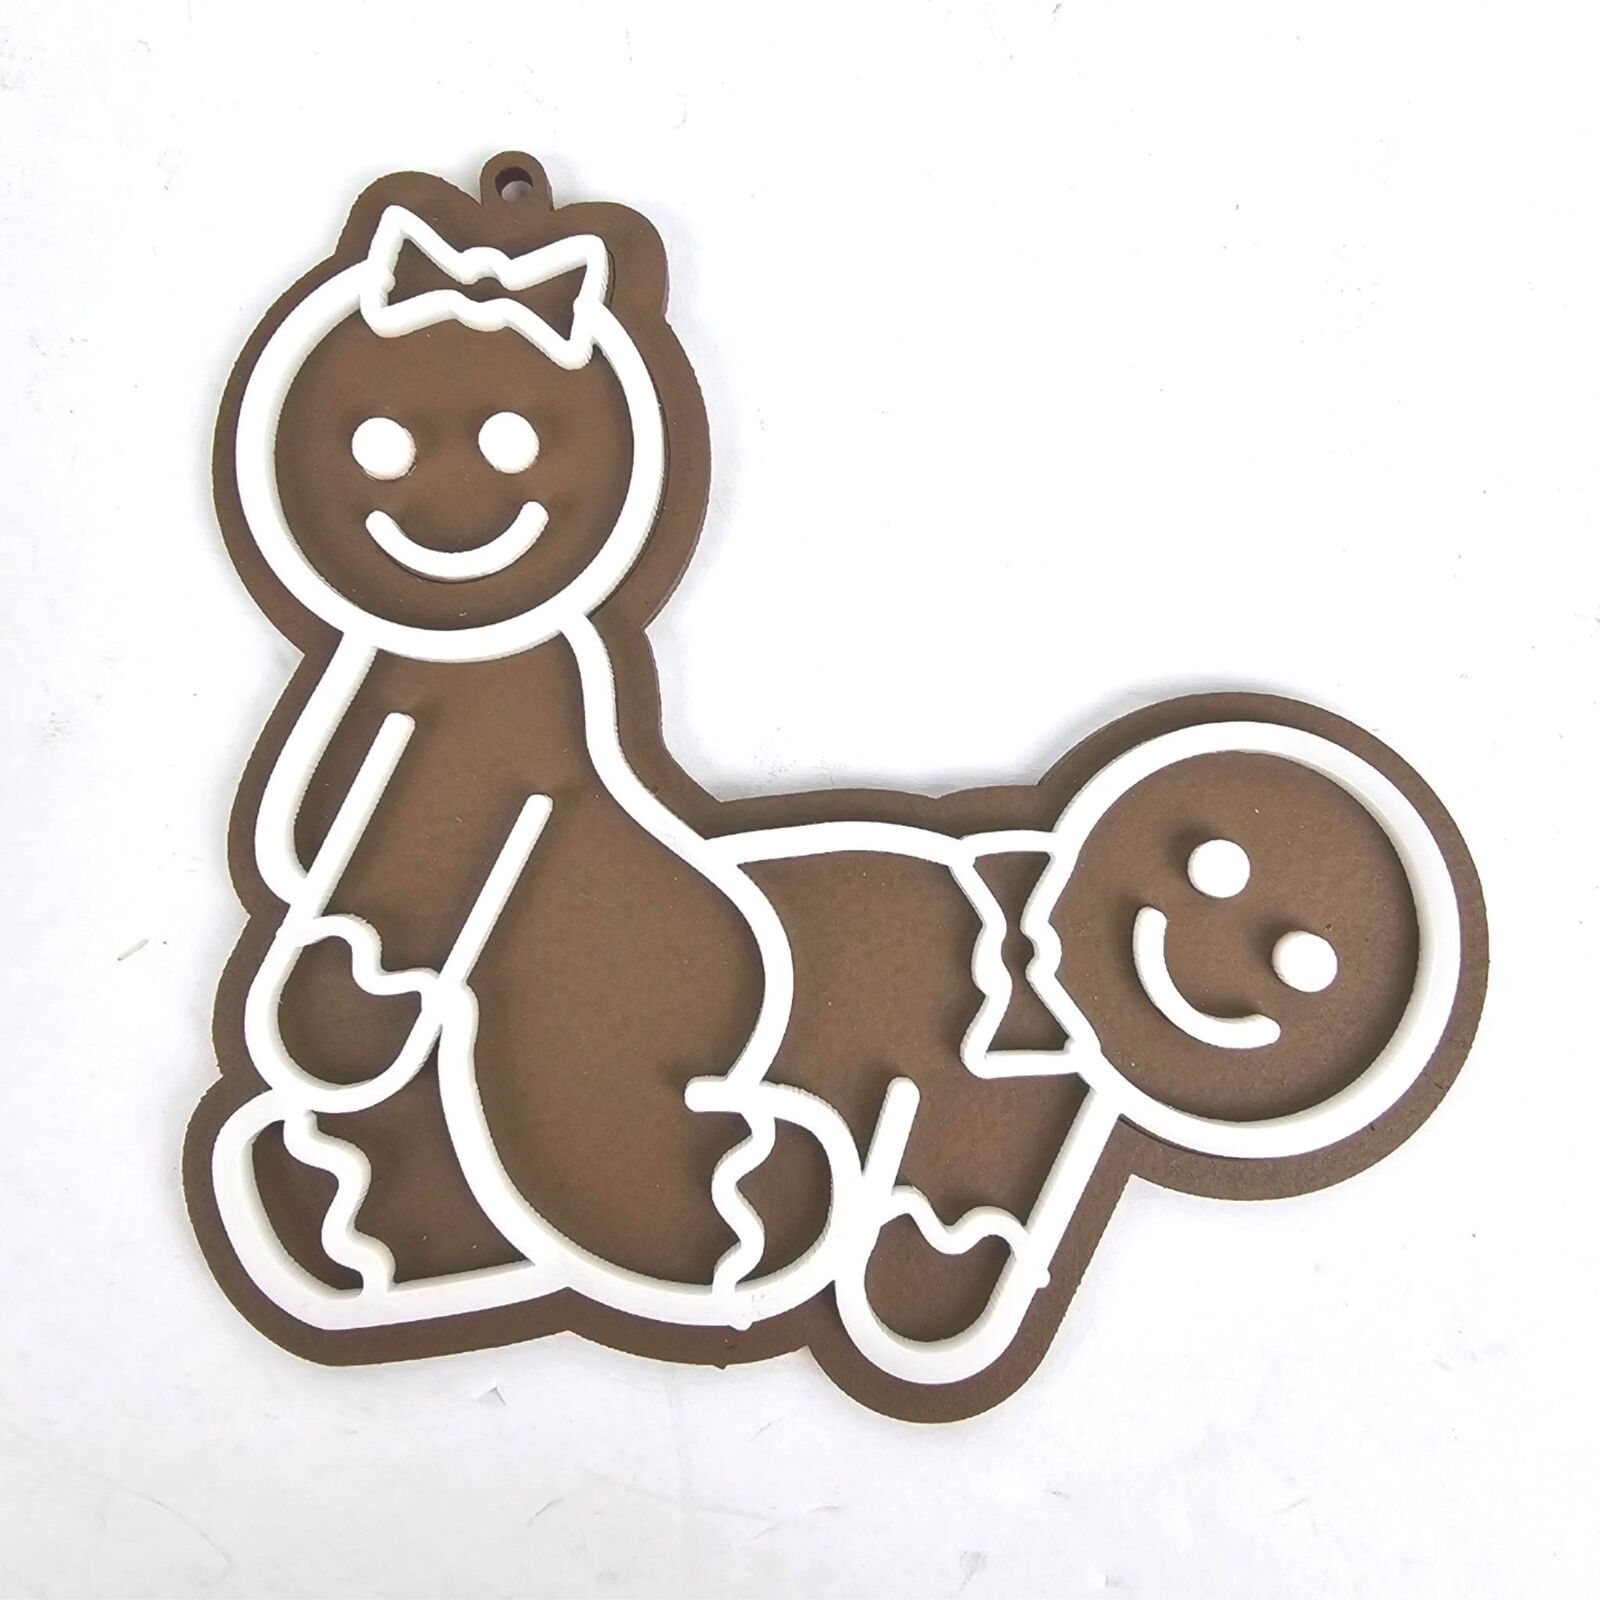 Naughty Gingerbread Cookie Christmas Ornament Adult Sexual Funny Reverse Cowgirl